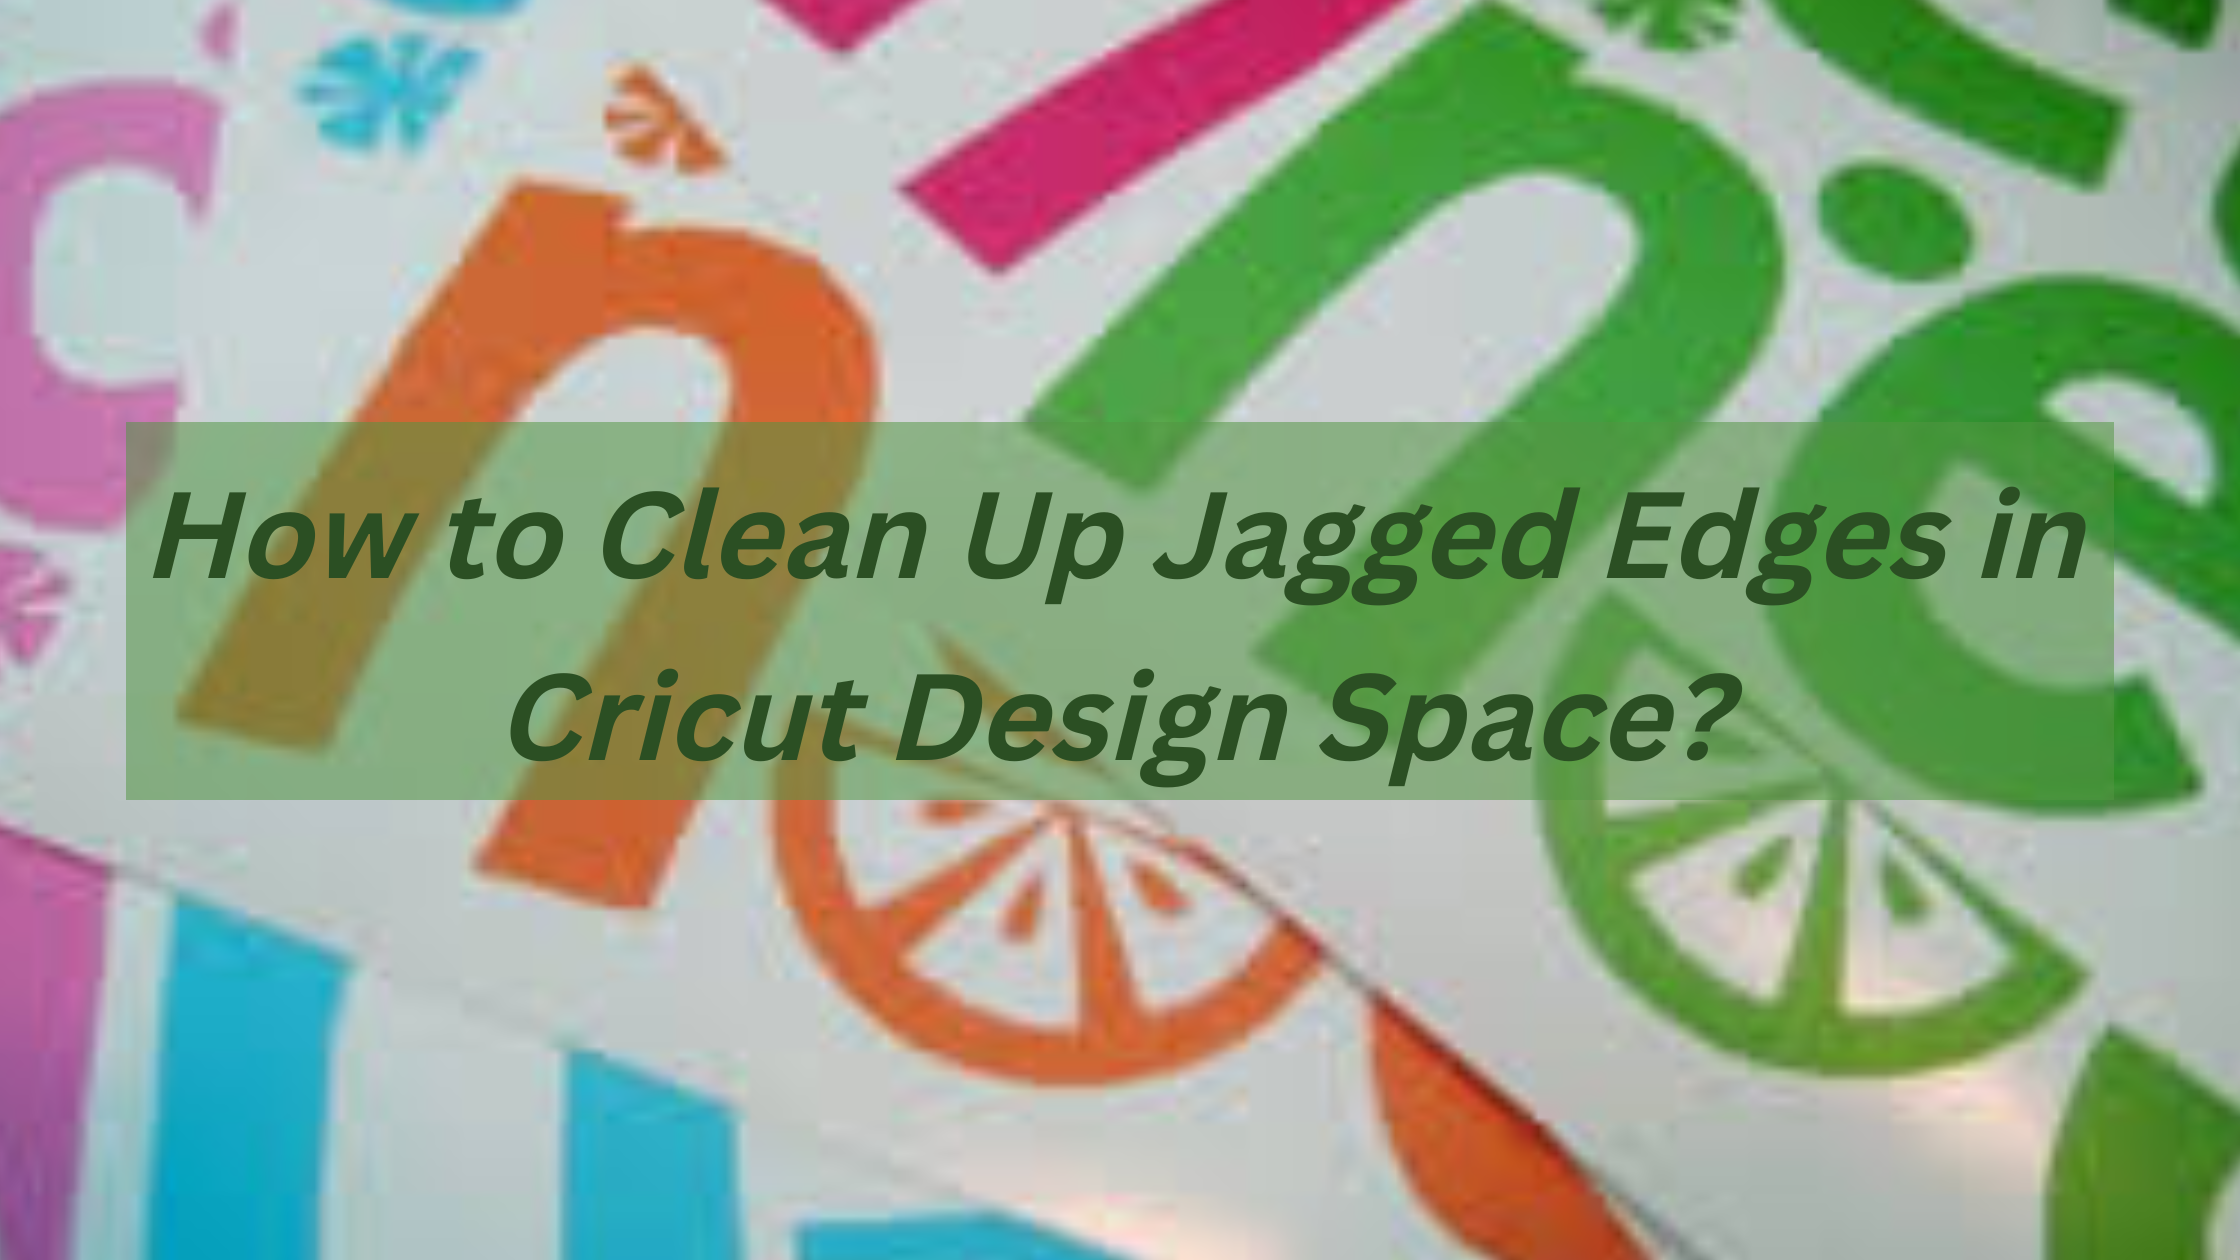 How to Clean Up Jagged Edges in Cricut Design Space?